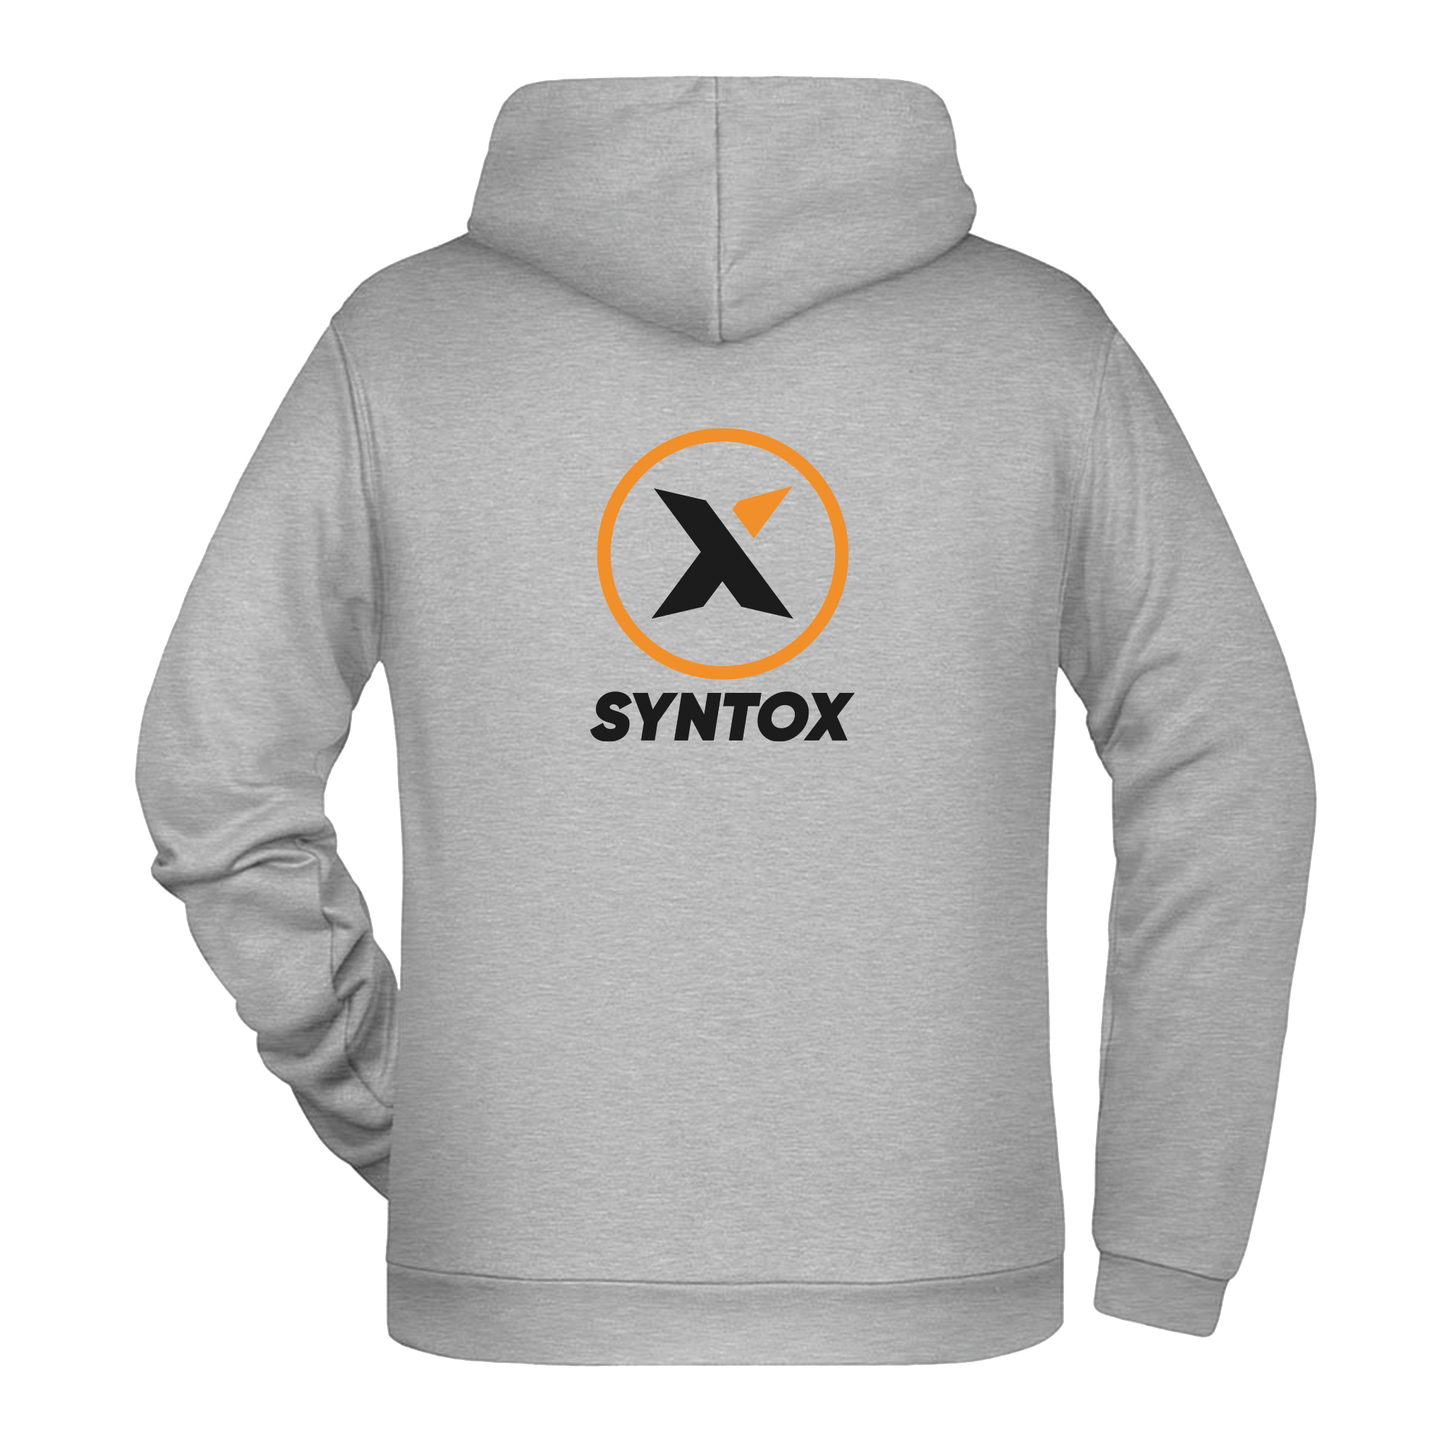 Syntox - Bomulds hoodie